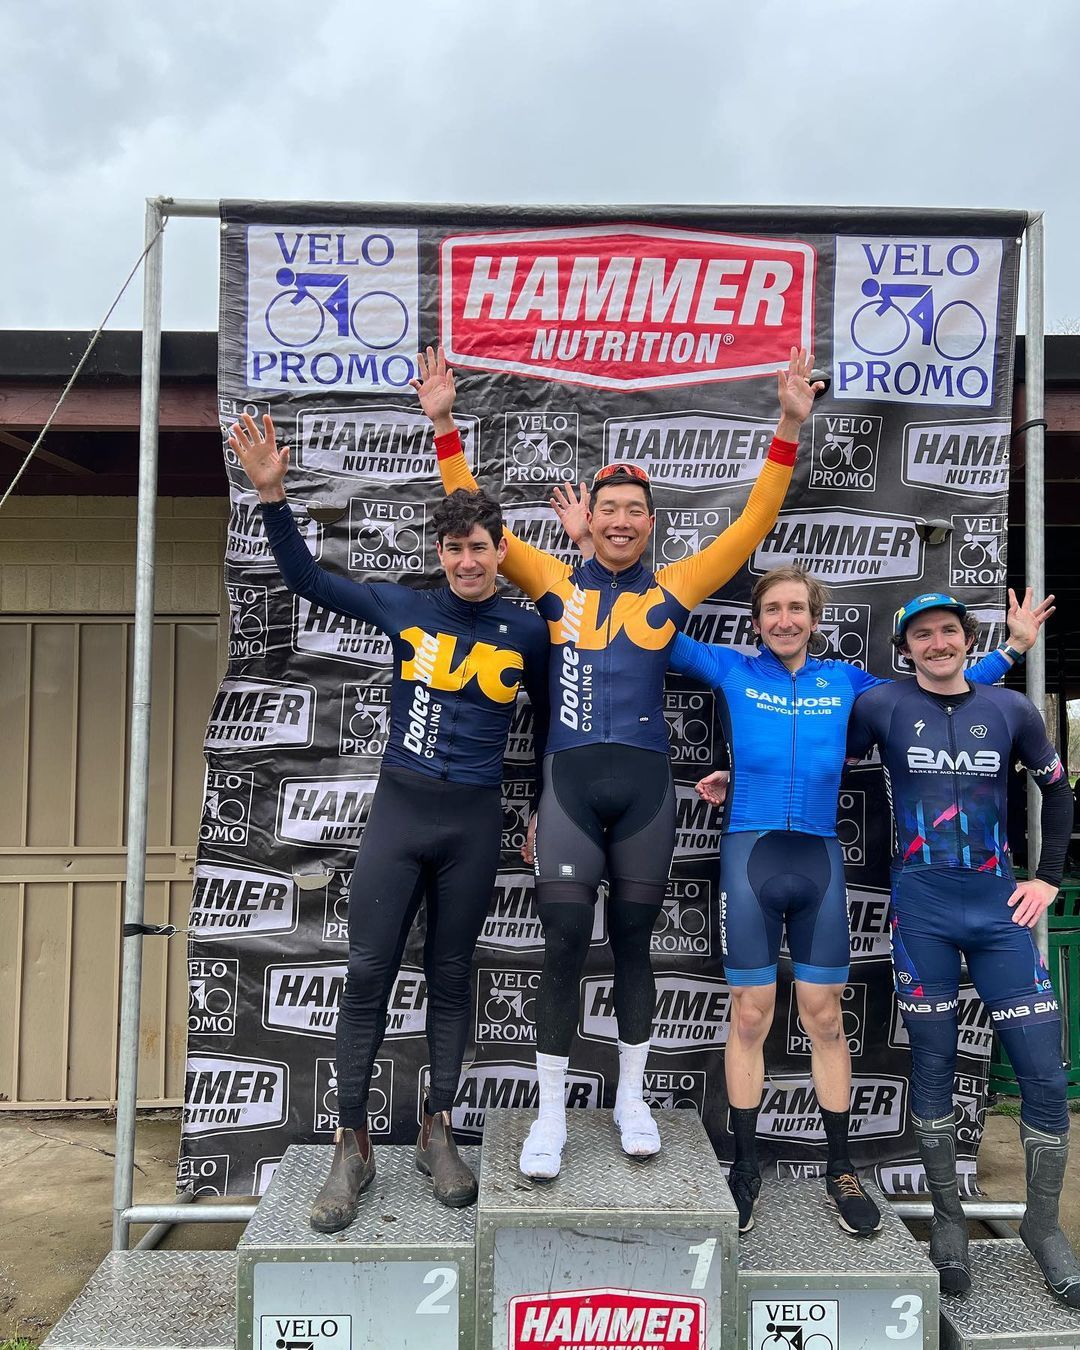 Opening weekend baby! The @velopromo #snellingroadrace NEVER disappoints! With snow falling at 7am, flooded sections of road hiding murderous potholes, and generally frigid temps that had everyone wearing ALL the gear they had, it was a day of both carnage and celebration! Huge congratulations go to @jyangsta for crushing the bunch sprint for the 🥇in the Elite 3 race, and for “GP” motoring home to nab 🥈after riding the break of the race. Continuing the DVC tradition of Snelling podium domination and making it a DVC 1-2! Big props to @mmcginley92 for throwing repeated haymakers in the final kilometers to make the other favorites chase and still finishing in the top ten! All this with over half the squad flatting out at one point or another.

Good luck at the #mercedcriterium tomorrow!

@sportful @sfitalianathleticclub @equatorcoffees @achieveptc @tripsforkidsmarin @sage.realestategroup @marinservicecourse @jkbrkb #themenkegeoup #onewealthadvisors @gelvio_us